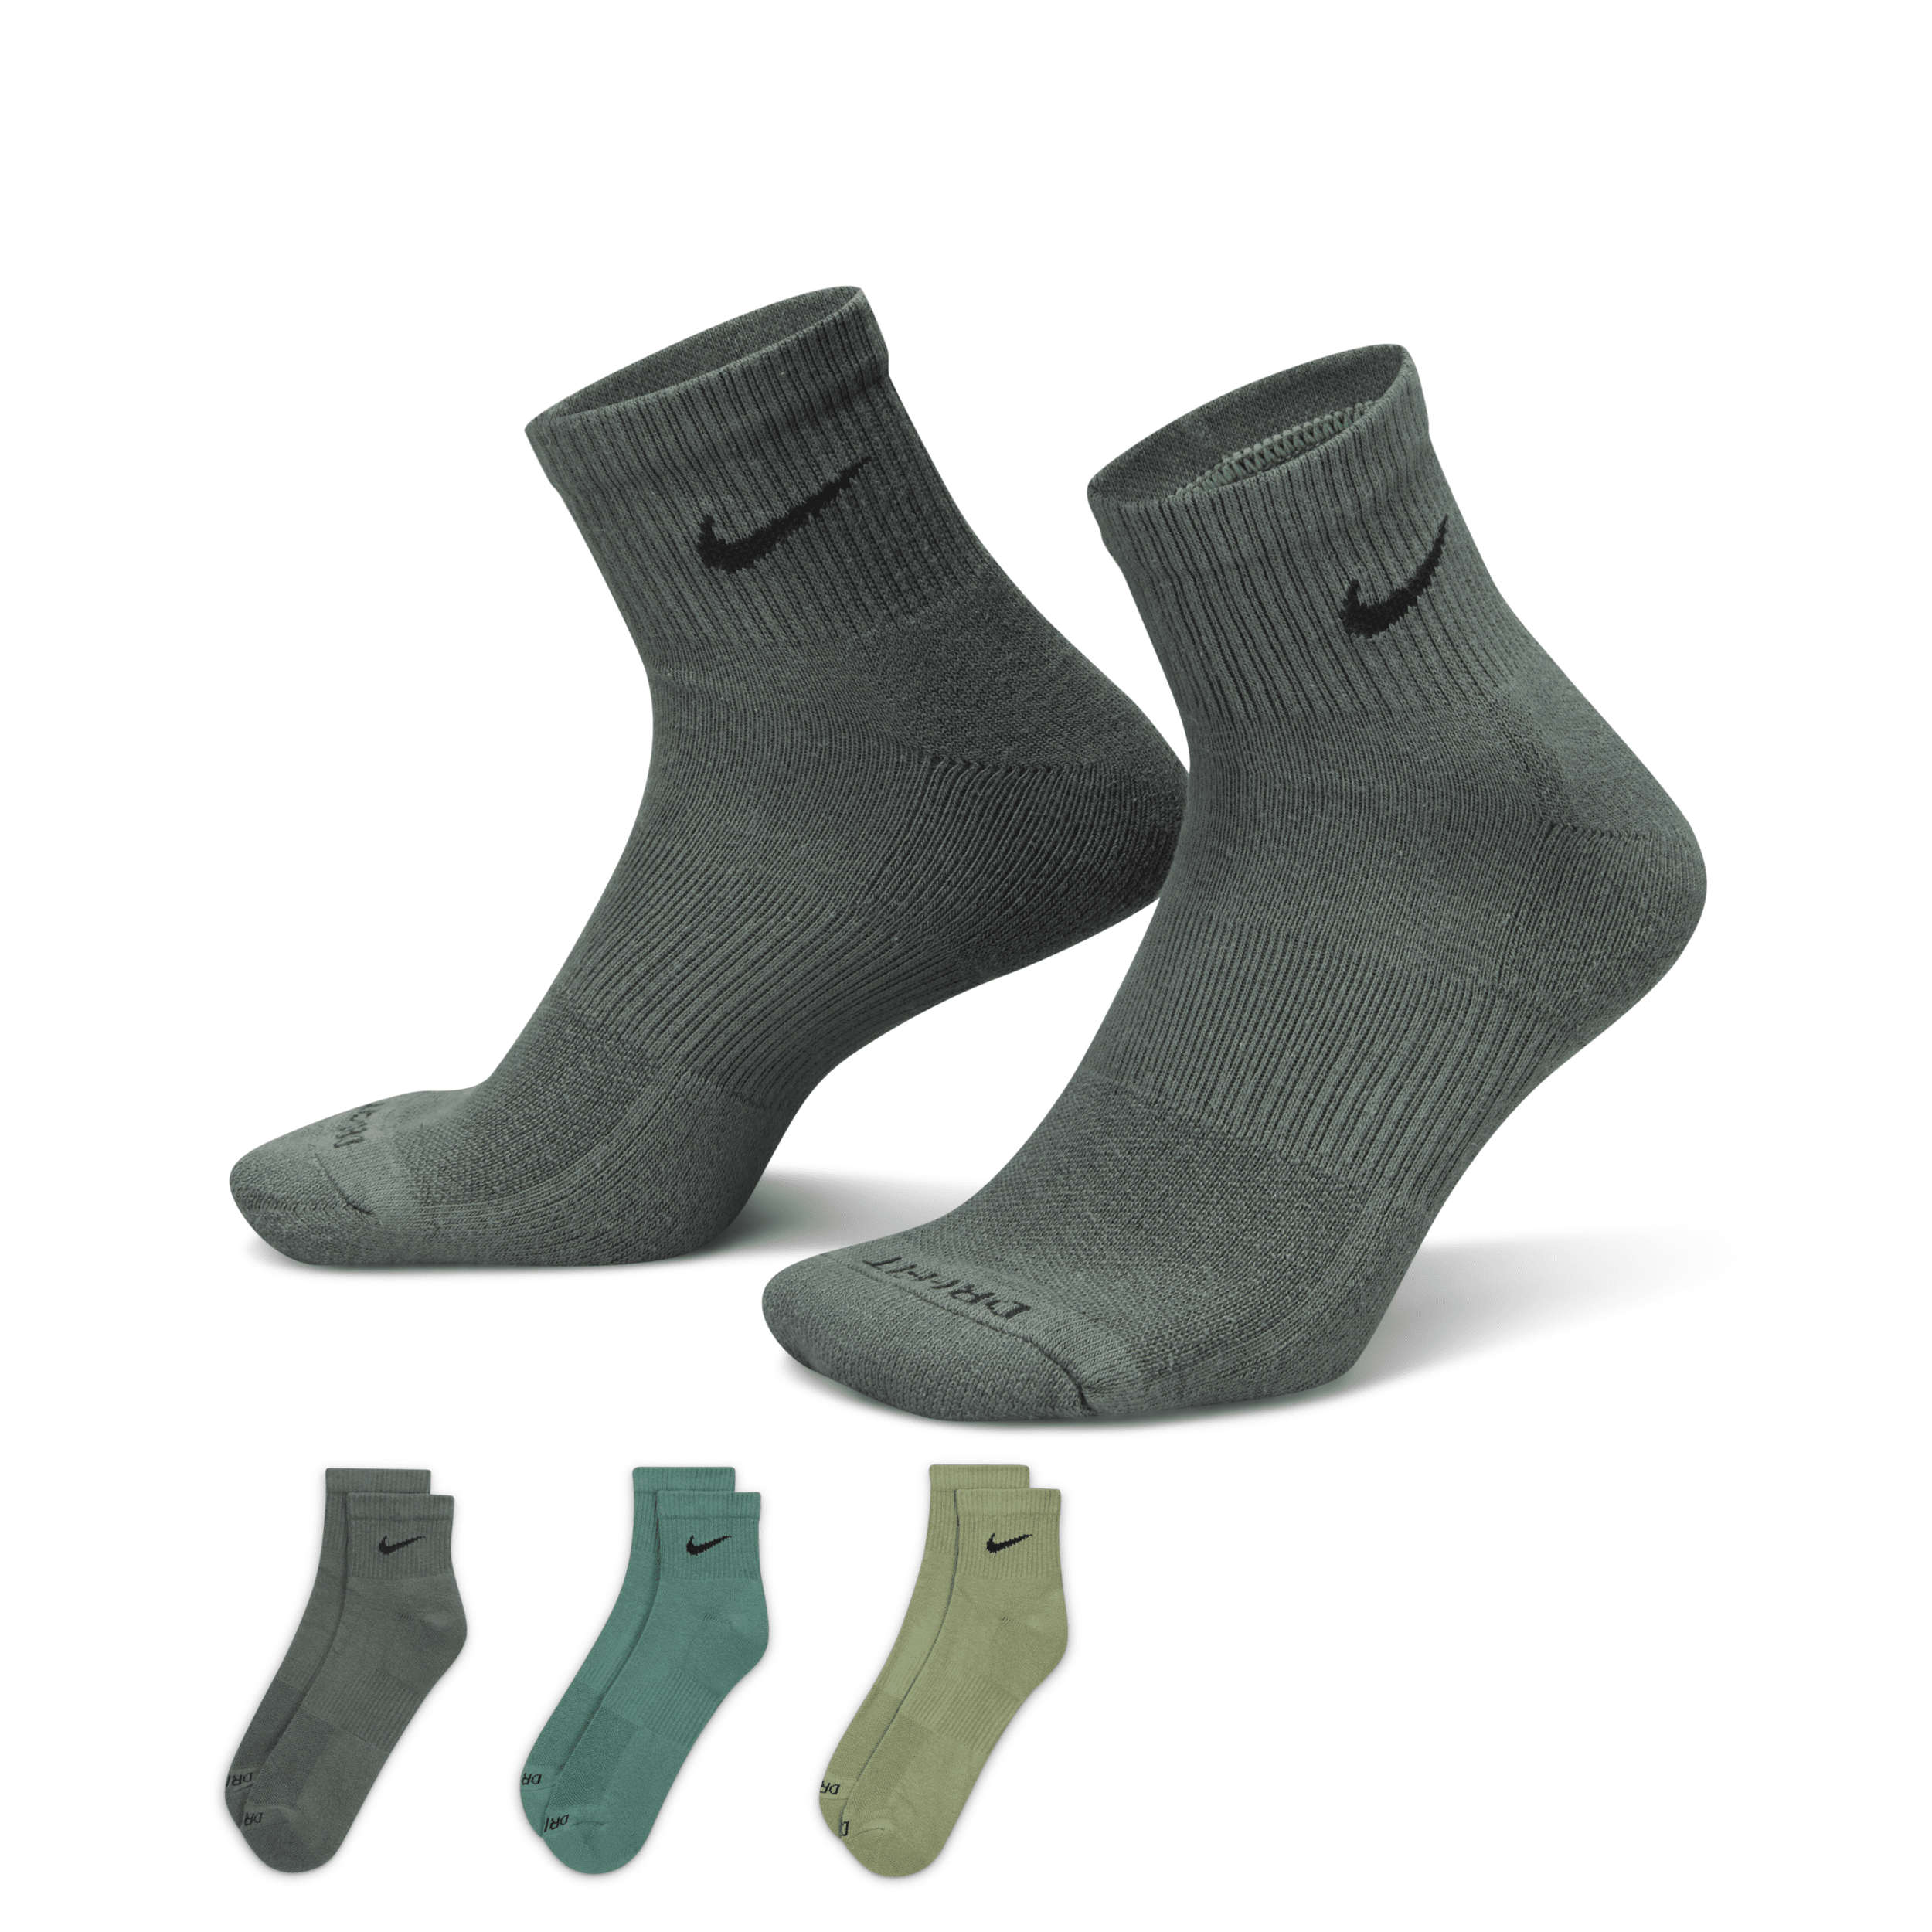 Nike Men's Everyday Plus Cushioned Training Ankle Socks (3 Pairs) In Multi